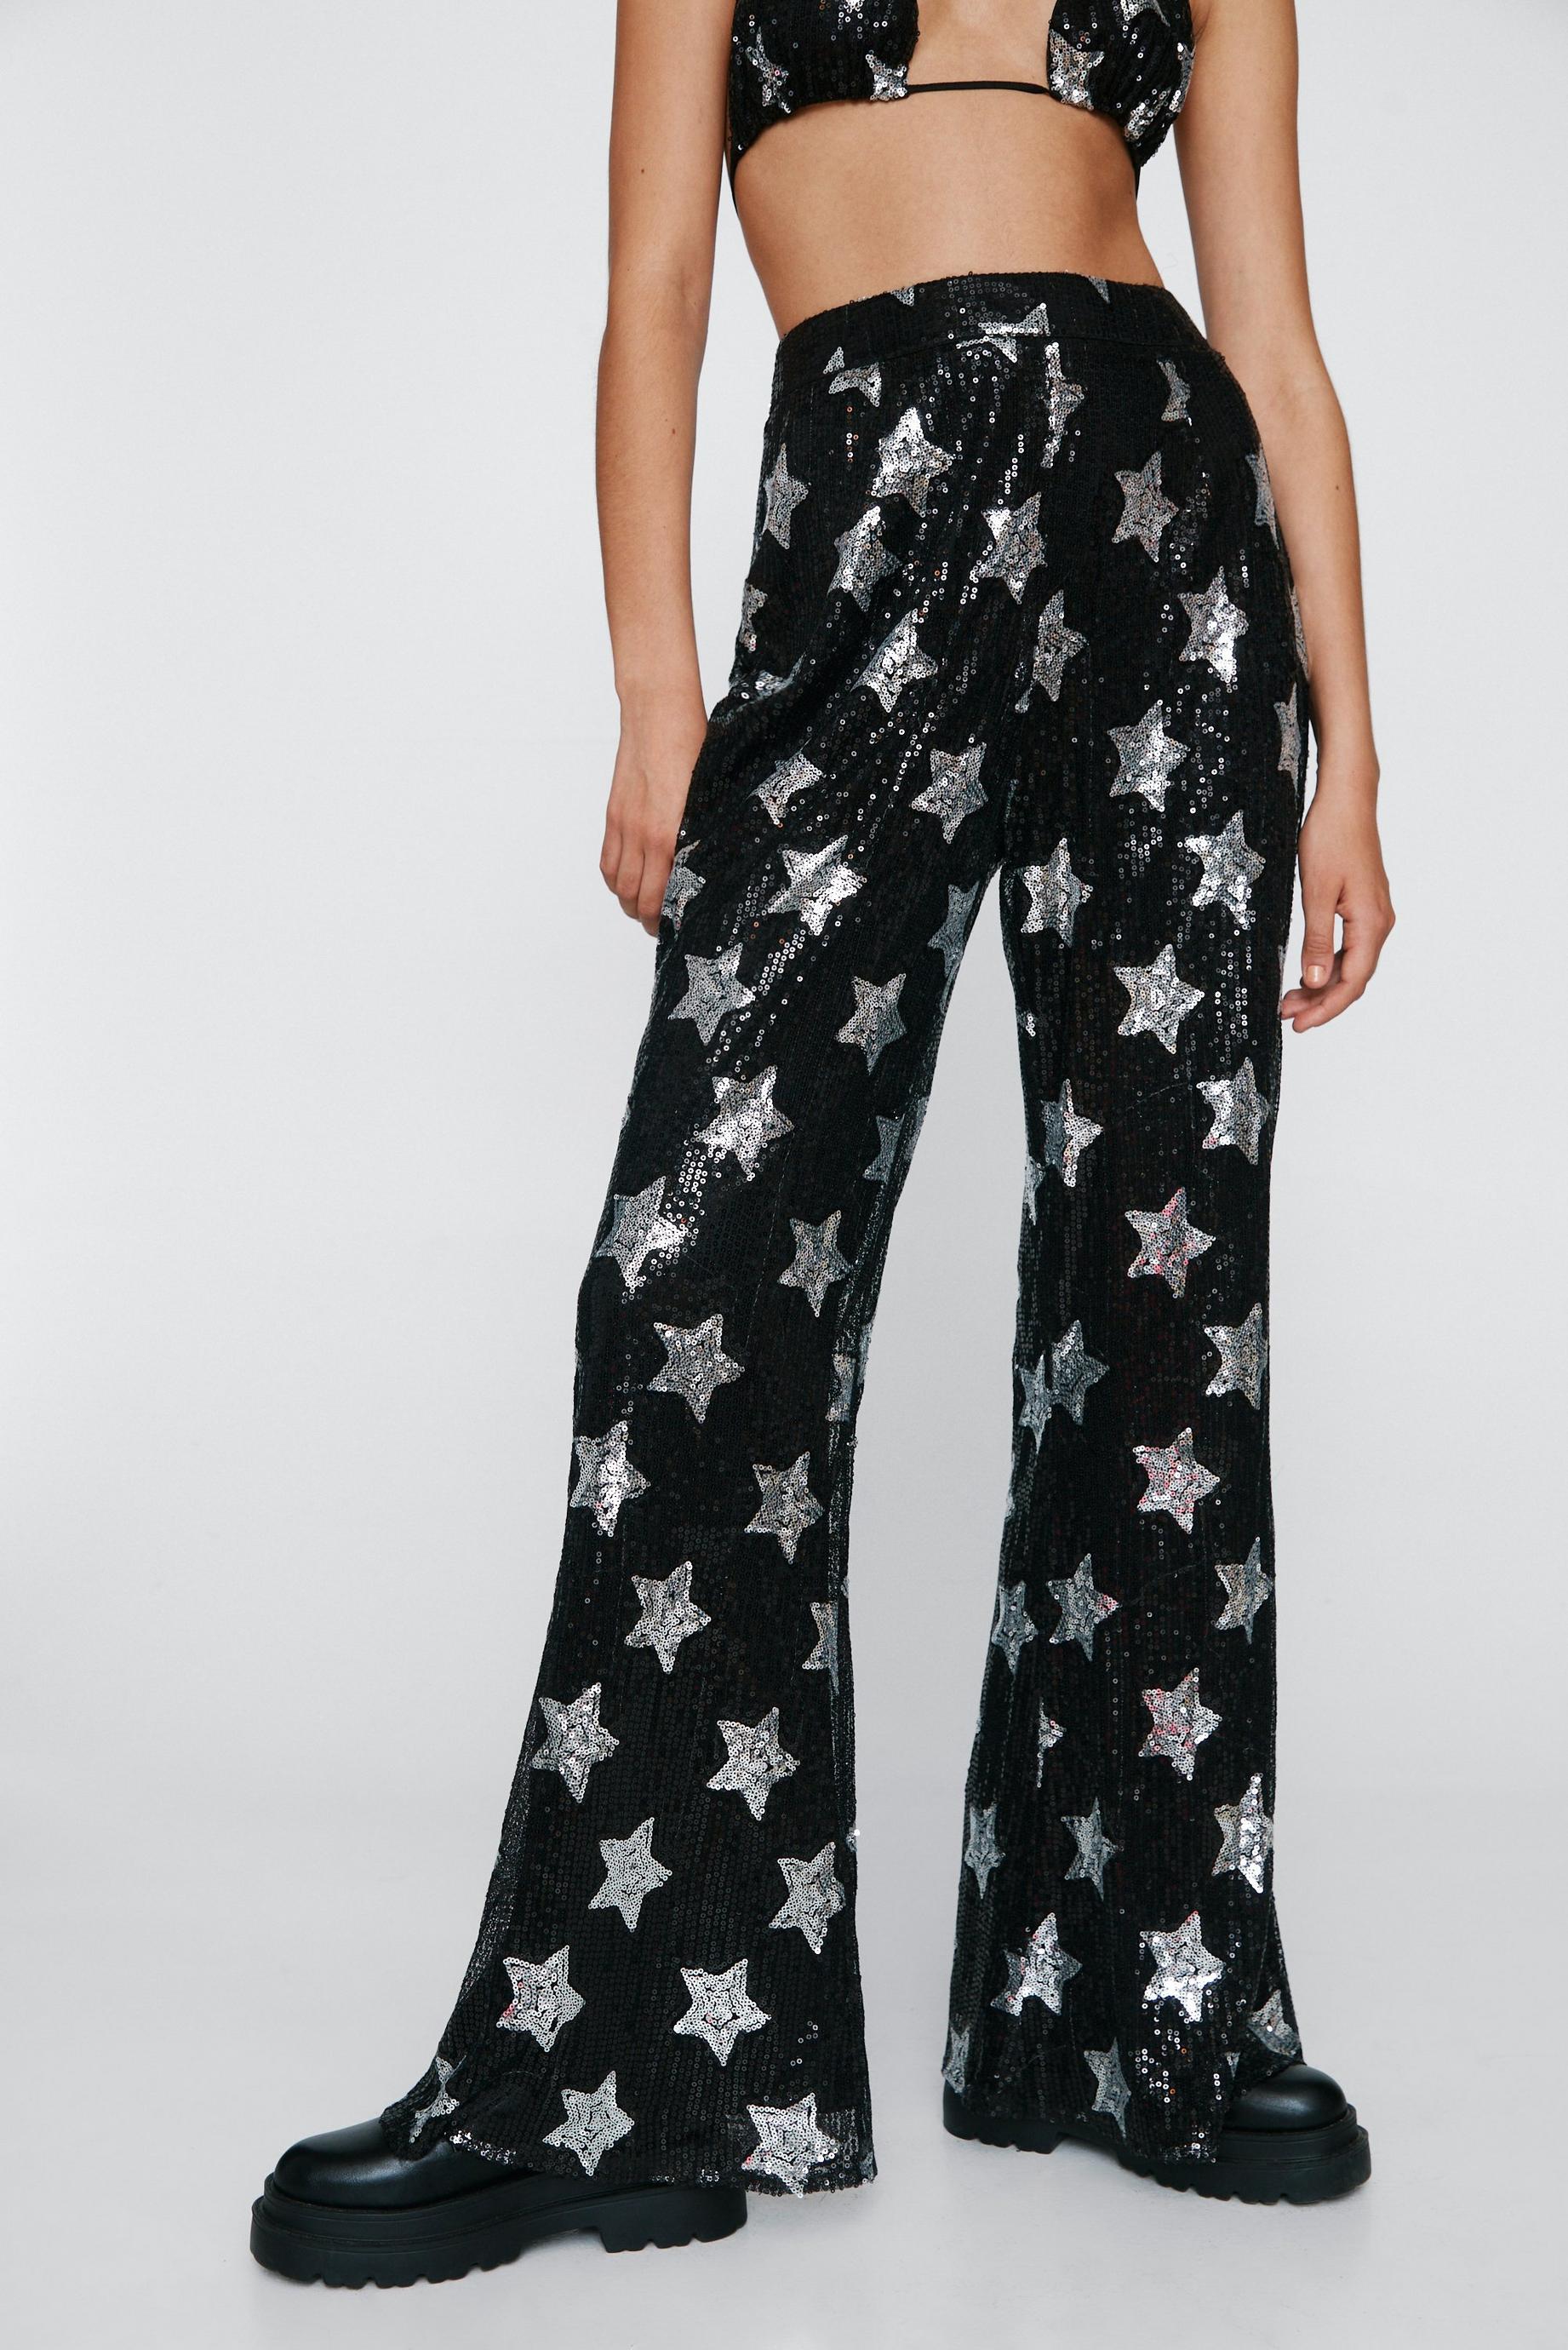 Star Sequin High Waisted Flared Pants